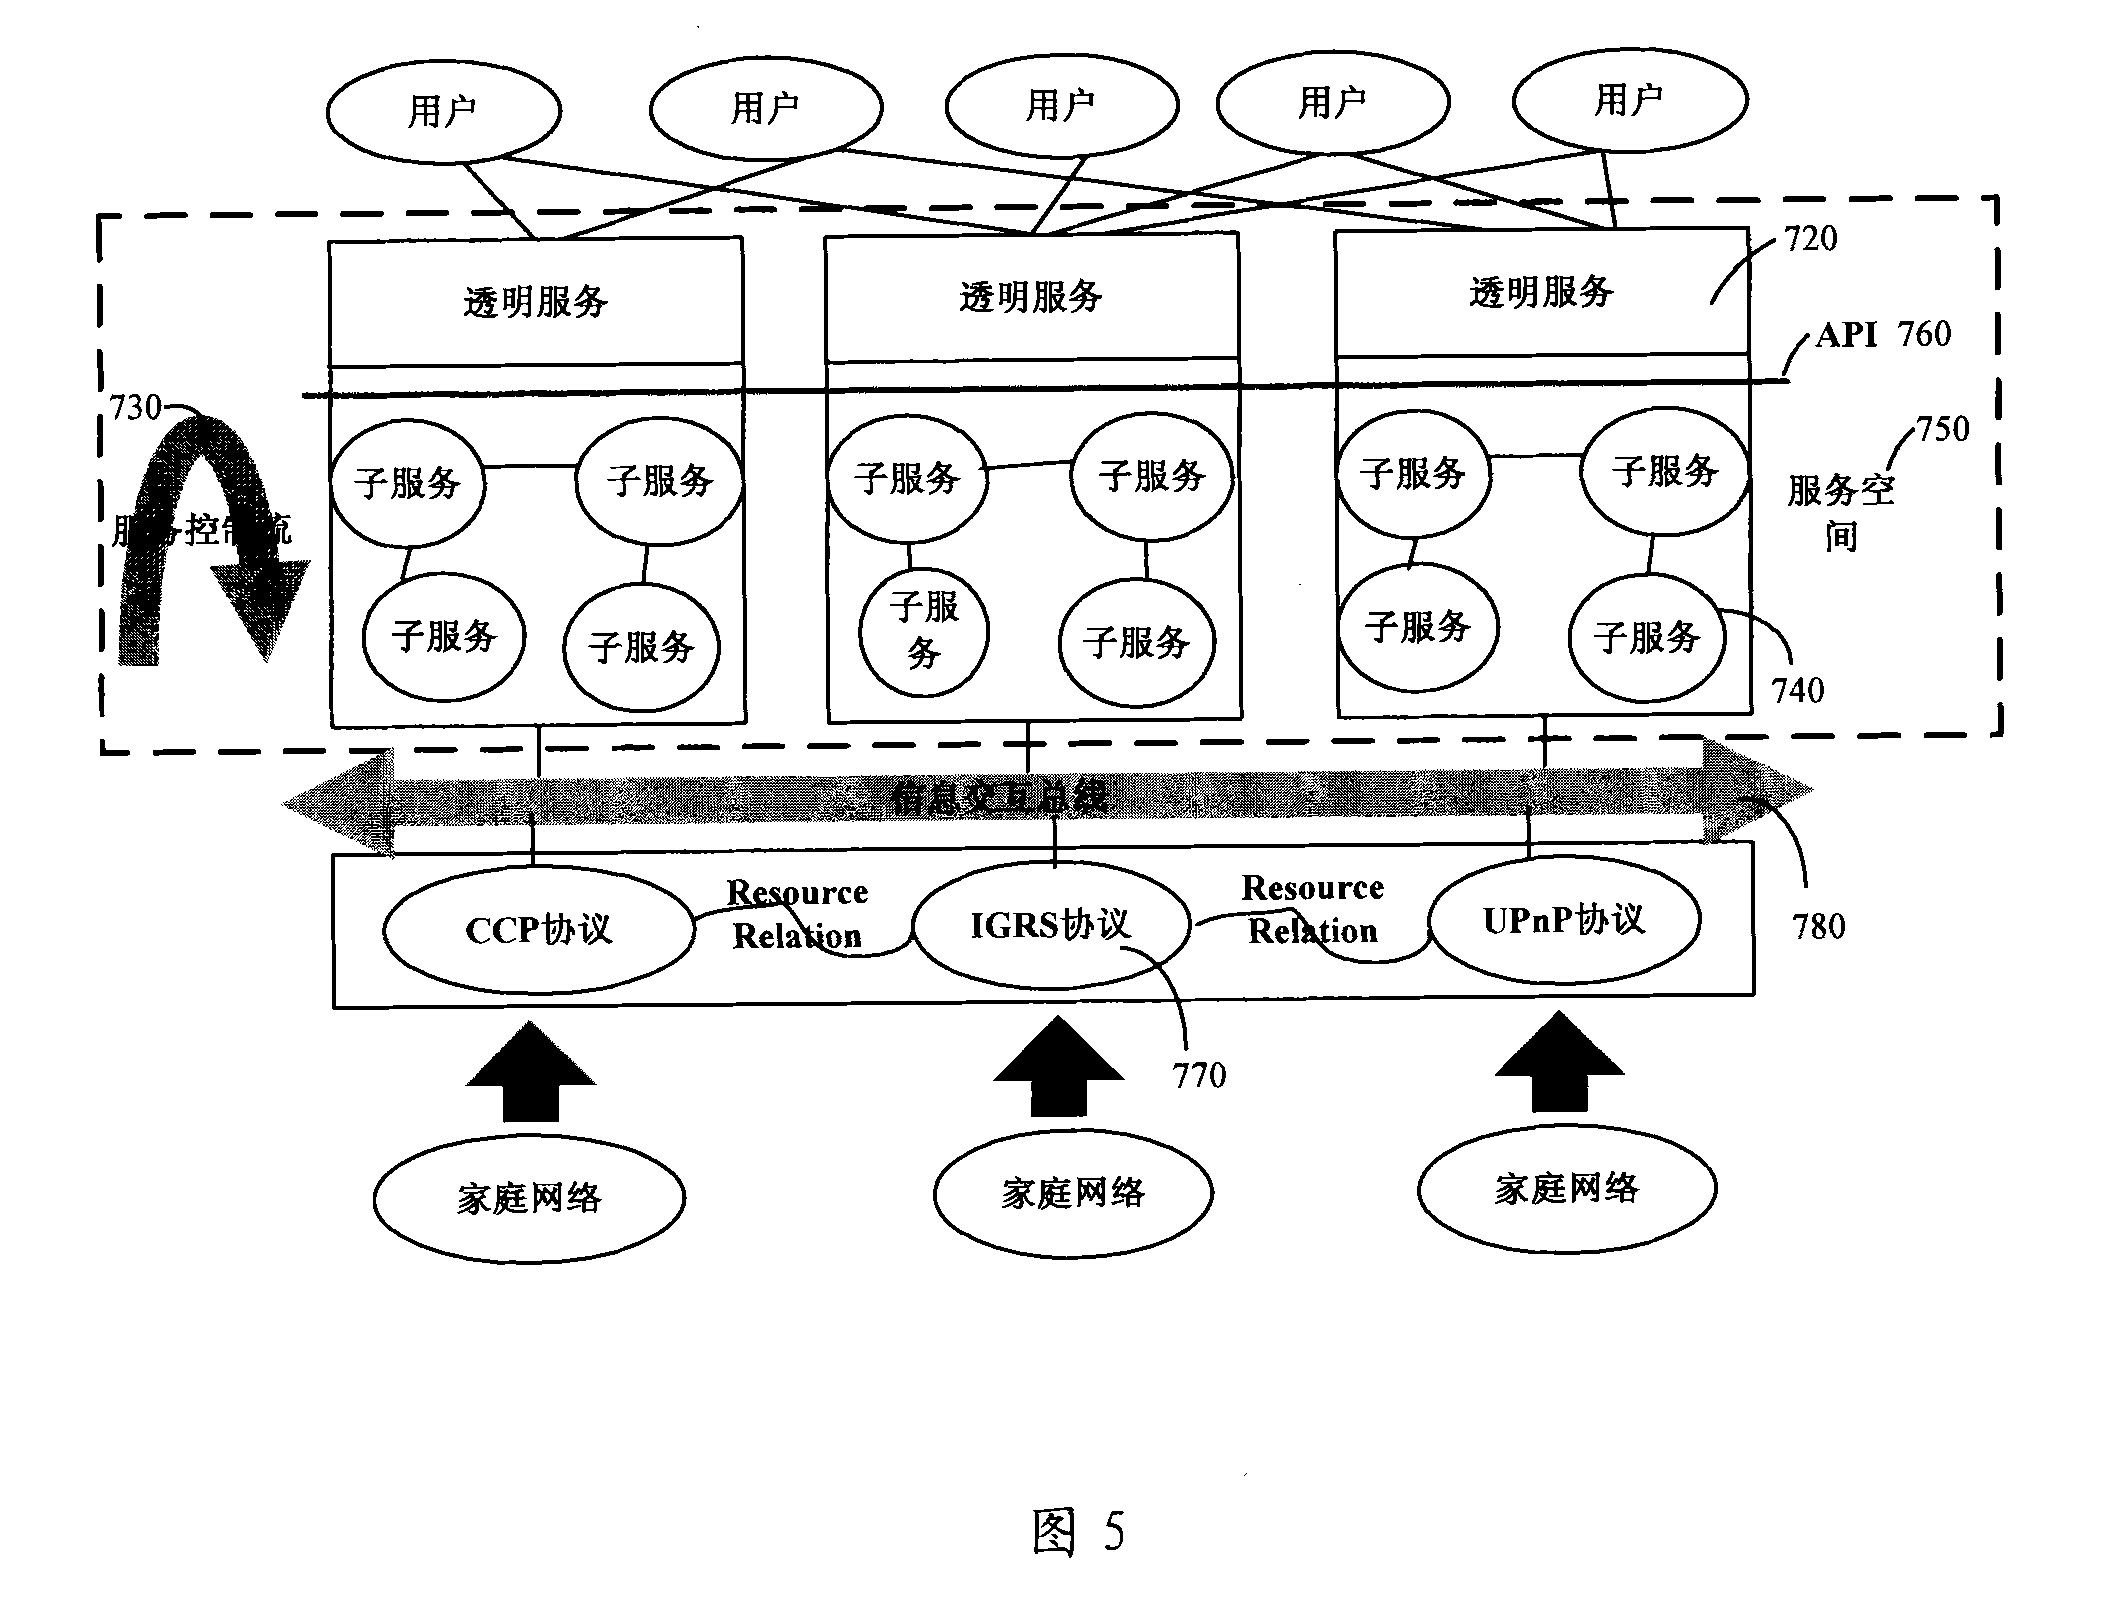 Method and system for implementing interconnection between different isomery household network standards